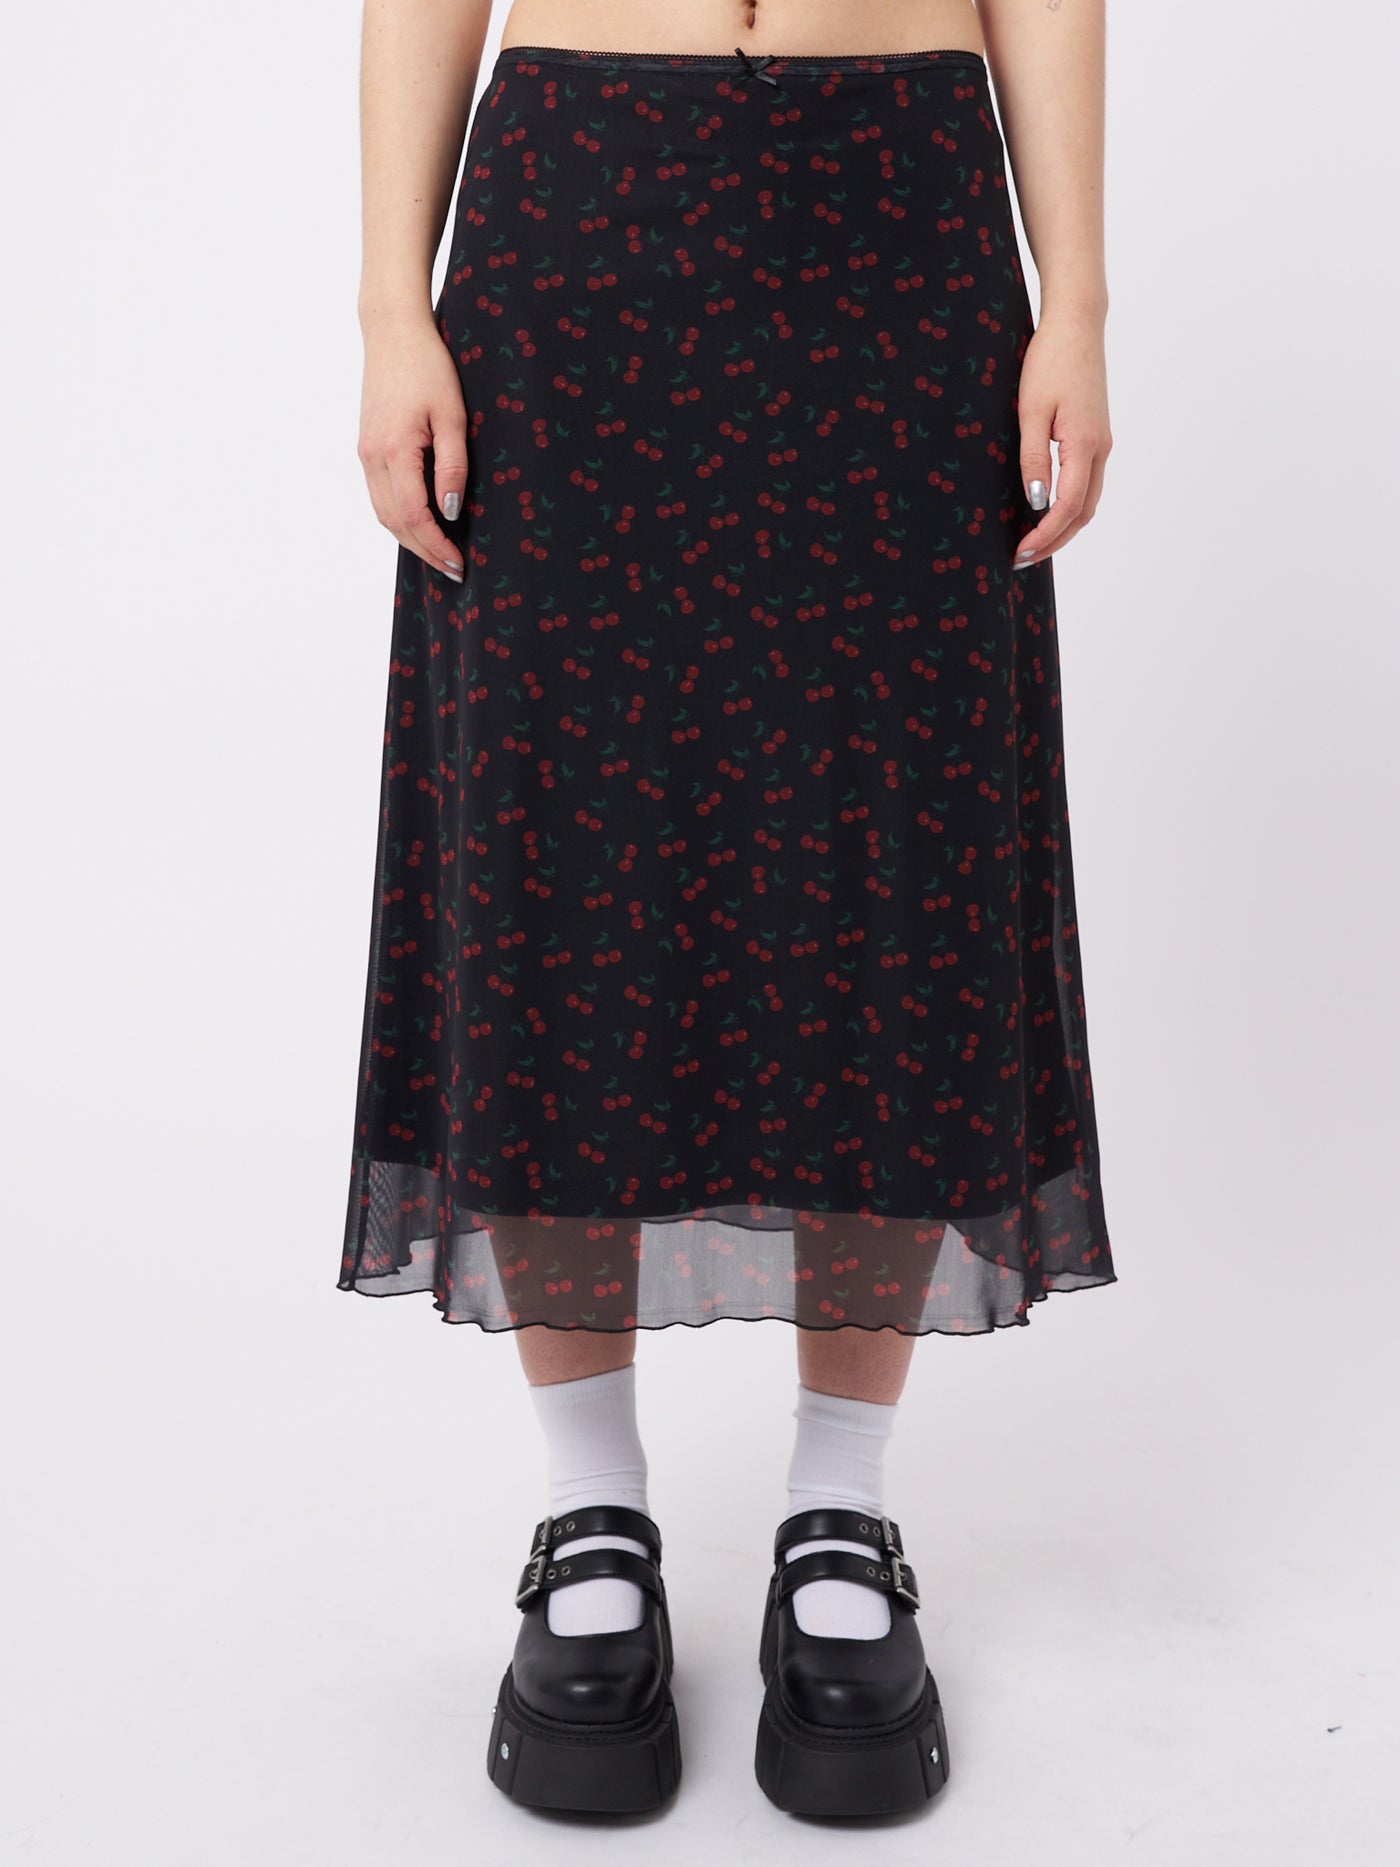 A mesh midi skirt with cherries print in black by Minga London. This skirt features a flirty and airy design, perfect for adding a playful and trendy touch to your outfit.